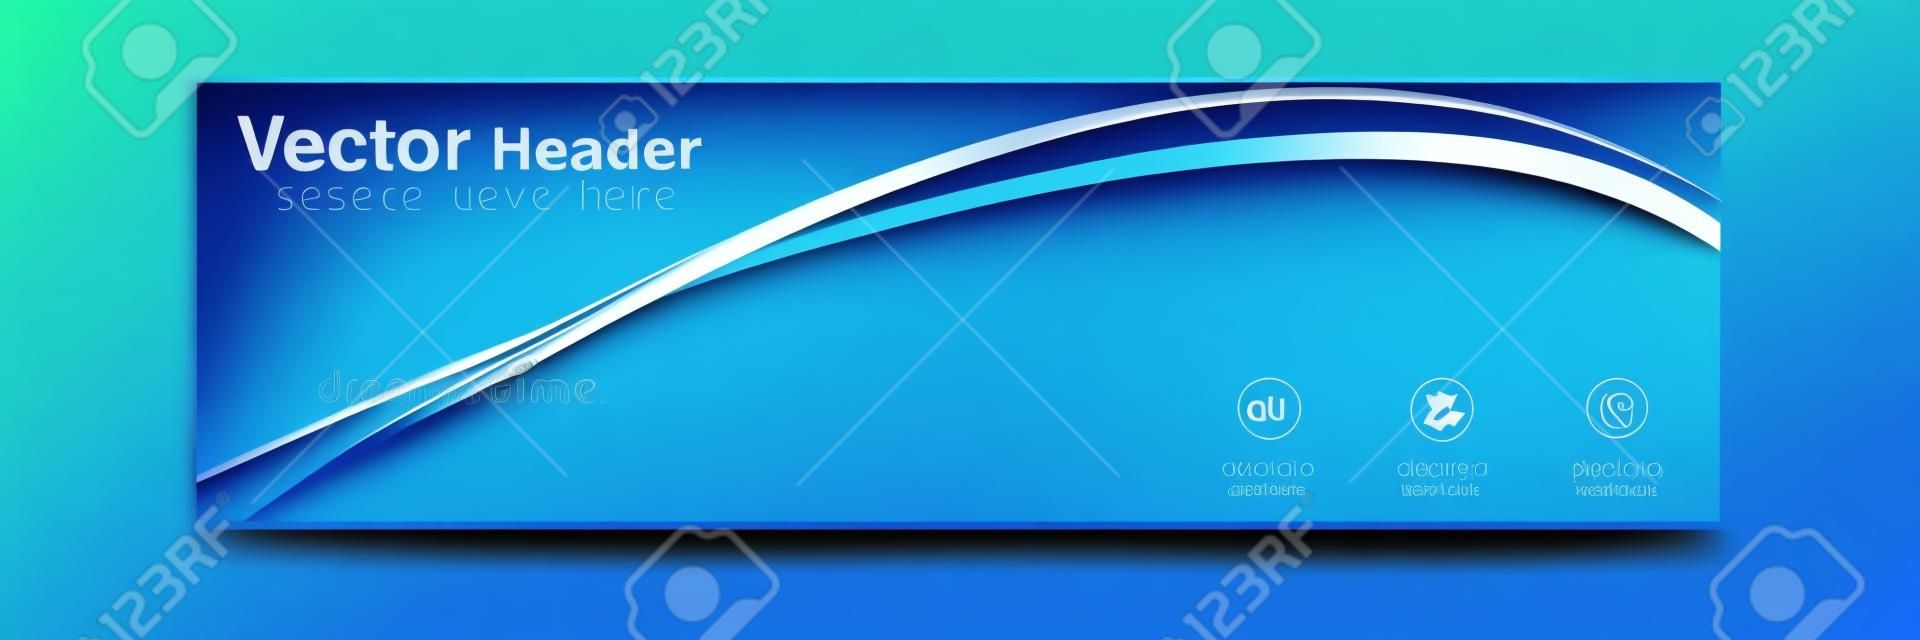 Abstract Blue Curve Header Design Background Vector Image